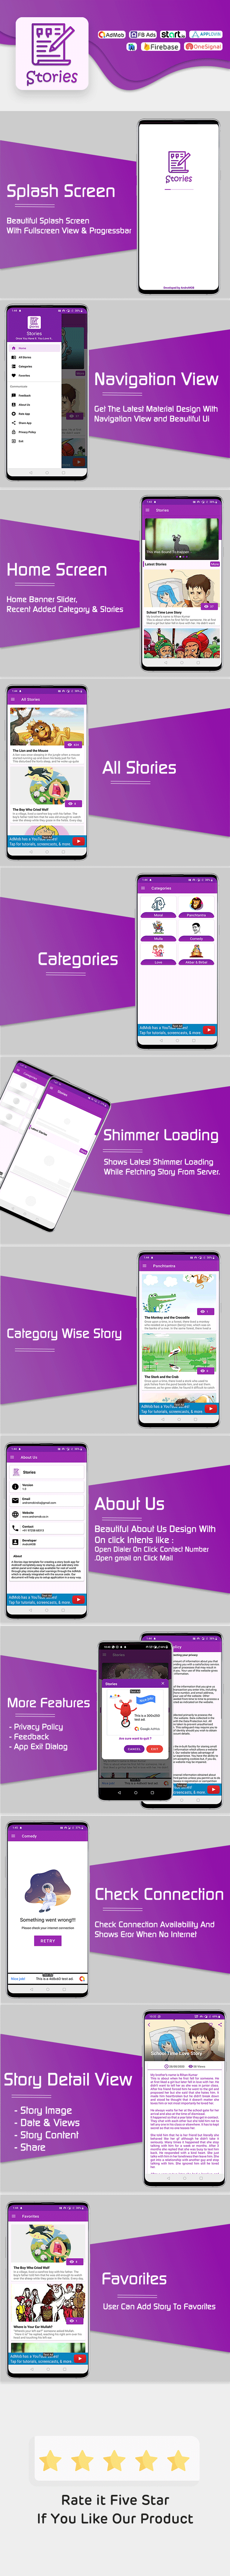 Online Stories App With Category - Admin Panel - Admob - 1